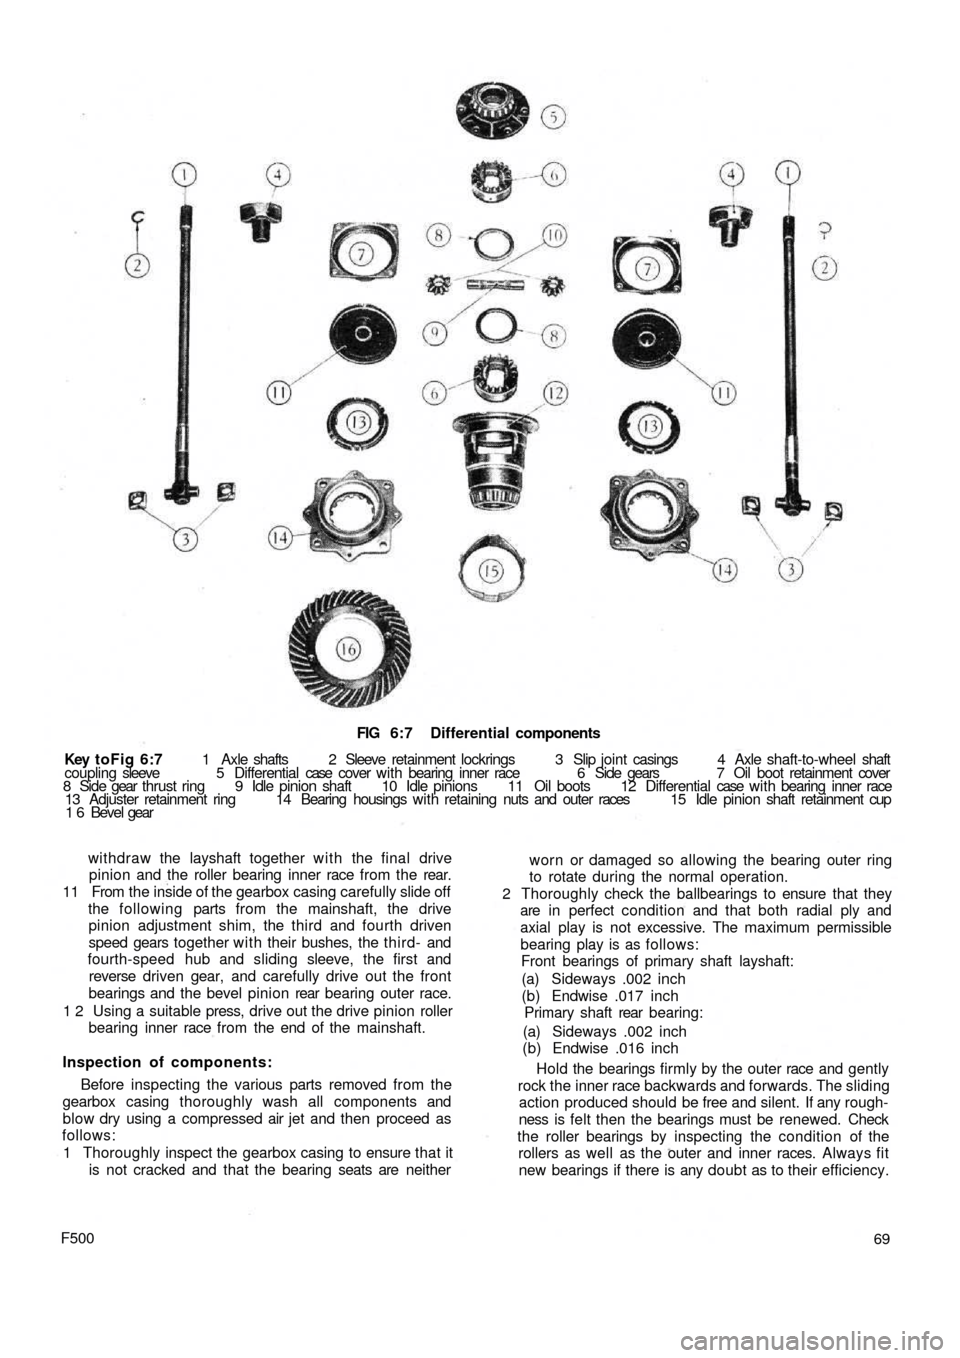 FIAT 500 1973 1.G Workshop Manual FIG 6:7  Differential components
Key toFig  6:7 1  Axle  shafts  2  Sleeve  retainment  lockrings   3   Slip  joint casings  4  Axle  shaft-to-wheel shaft
coupling sleeve  5  Differential case  cover 